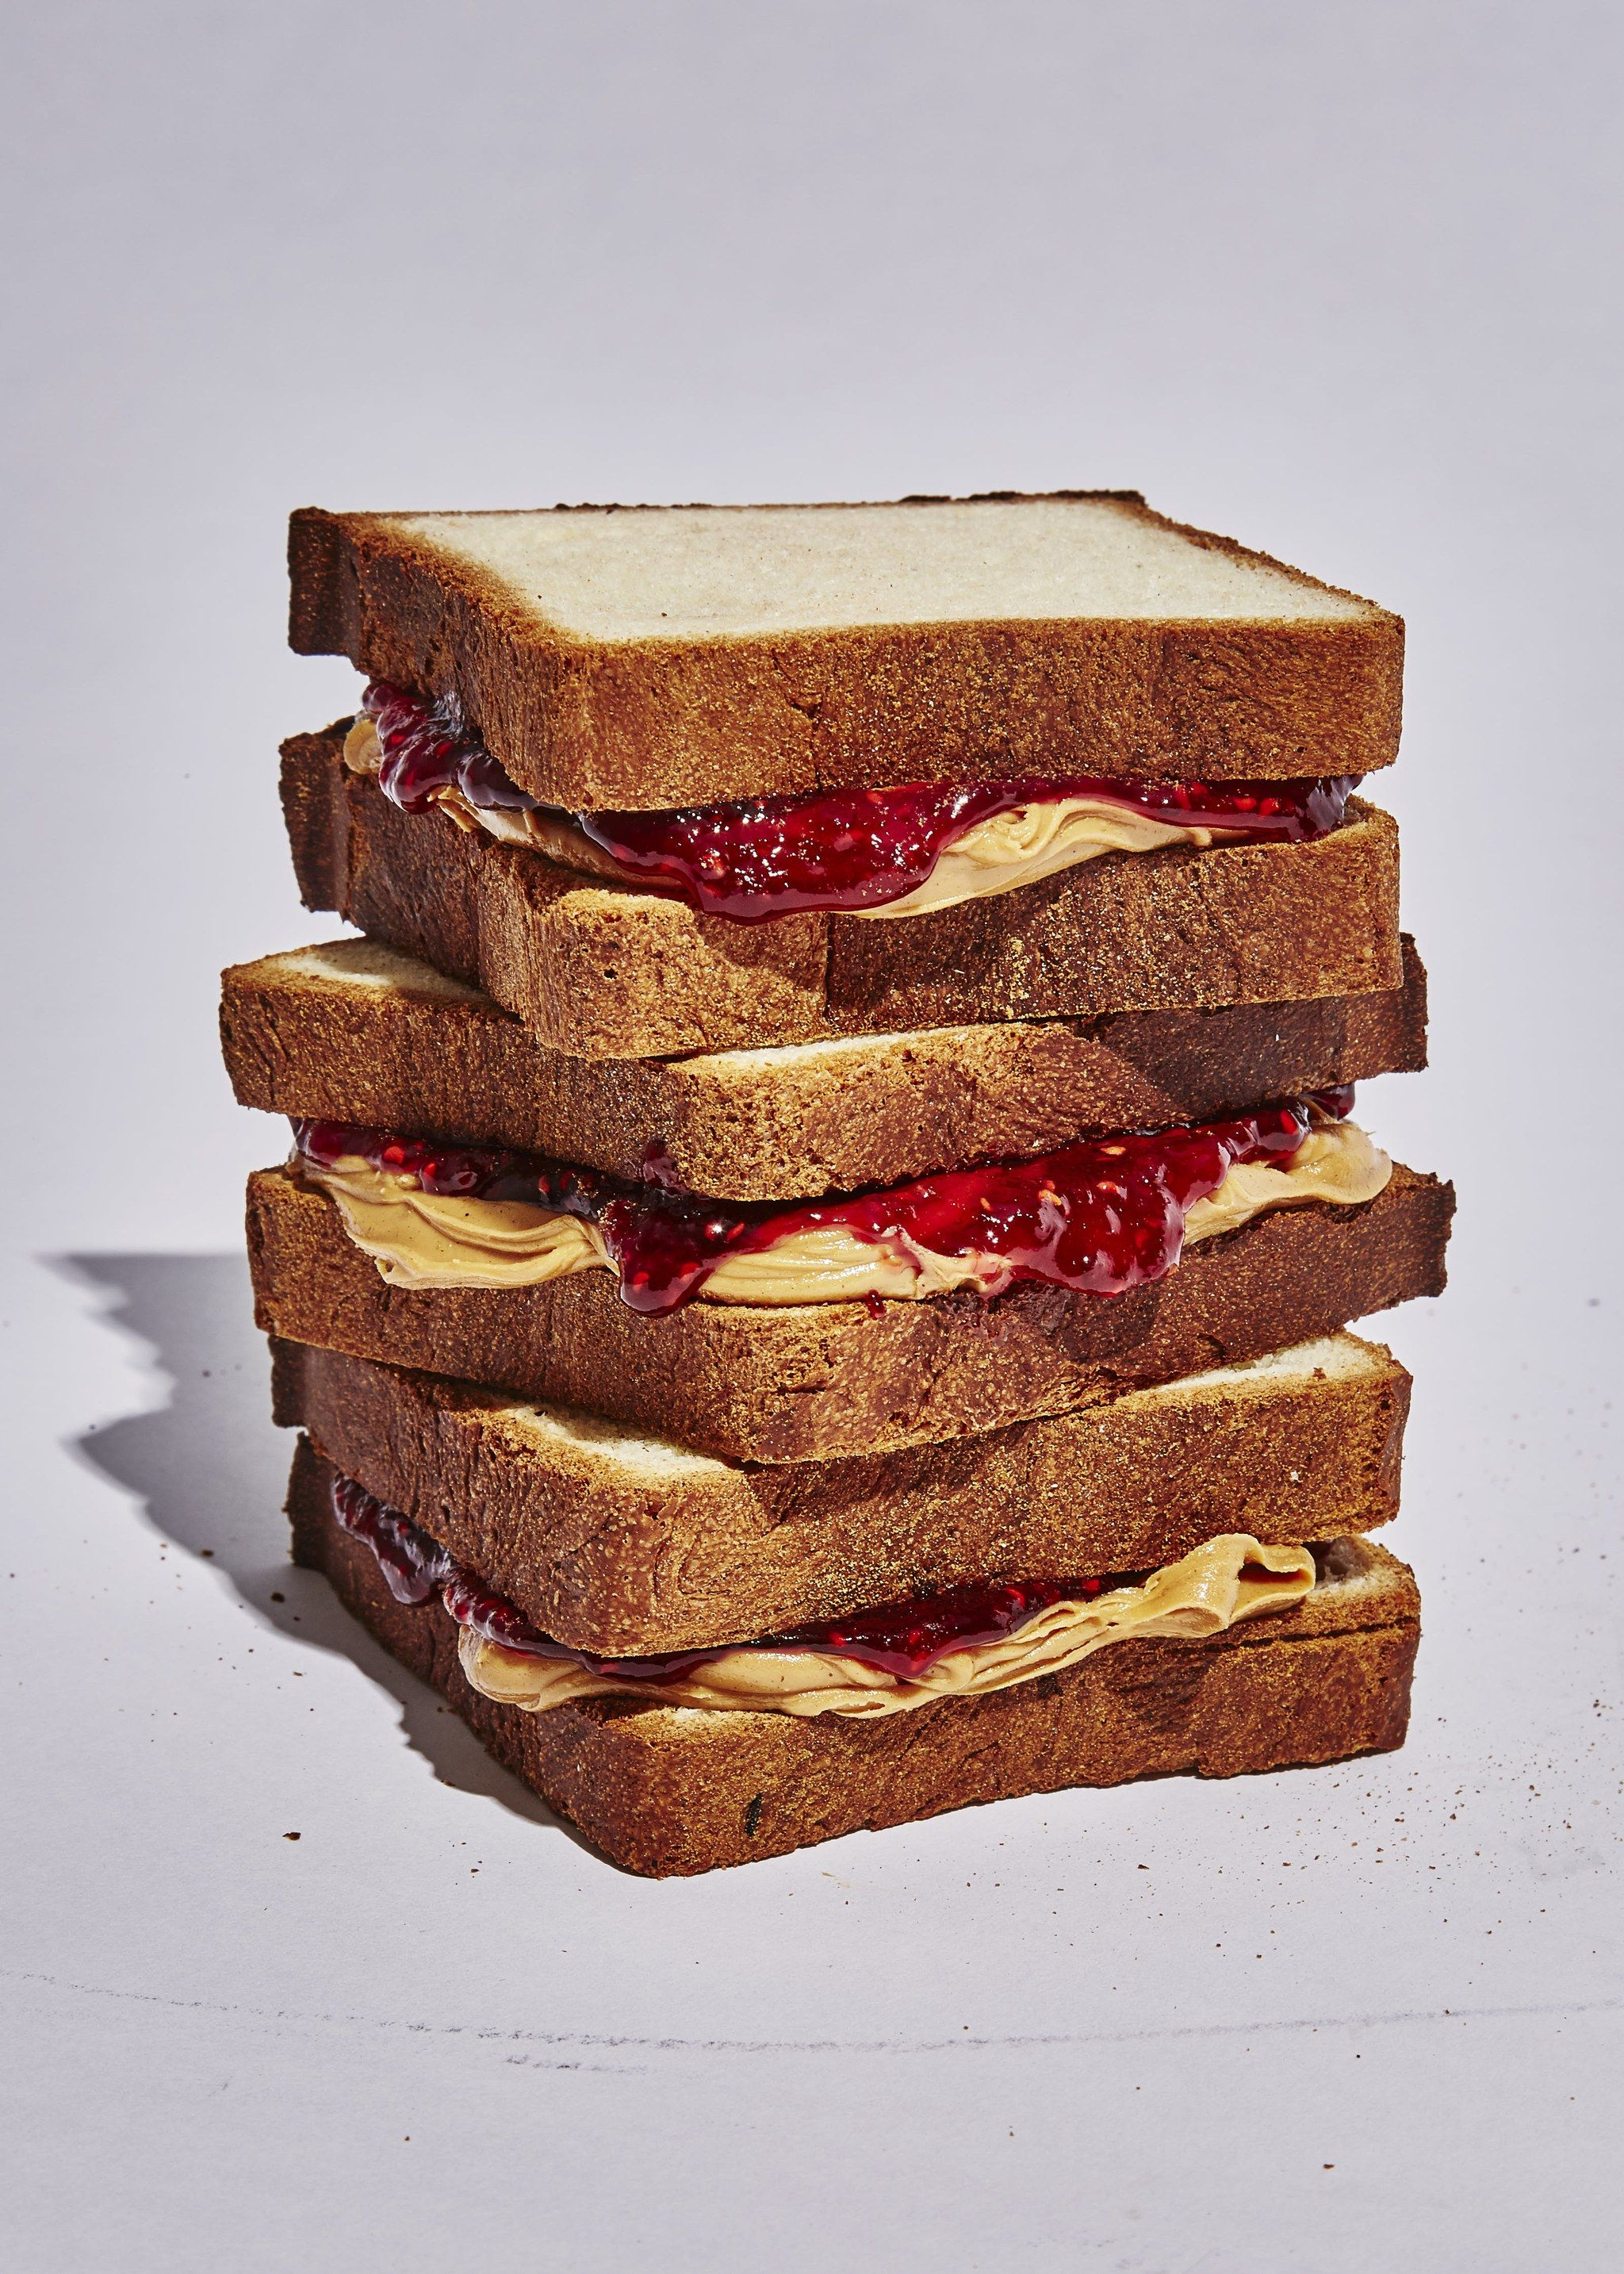 2048x2867 6 Hot Takes About the Right Way to Make a PB\u0026J | Peanut butter jelly sandwich, Tea sandwiches recipes, Peanut butter sandwich